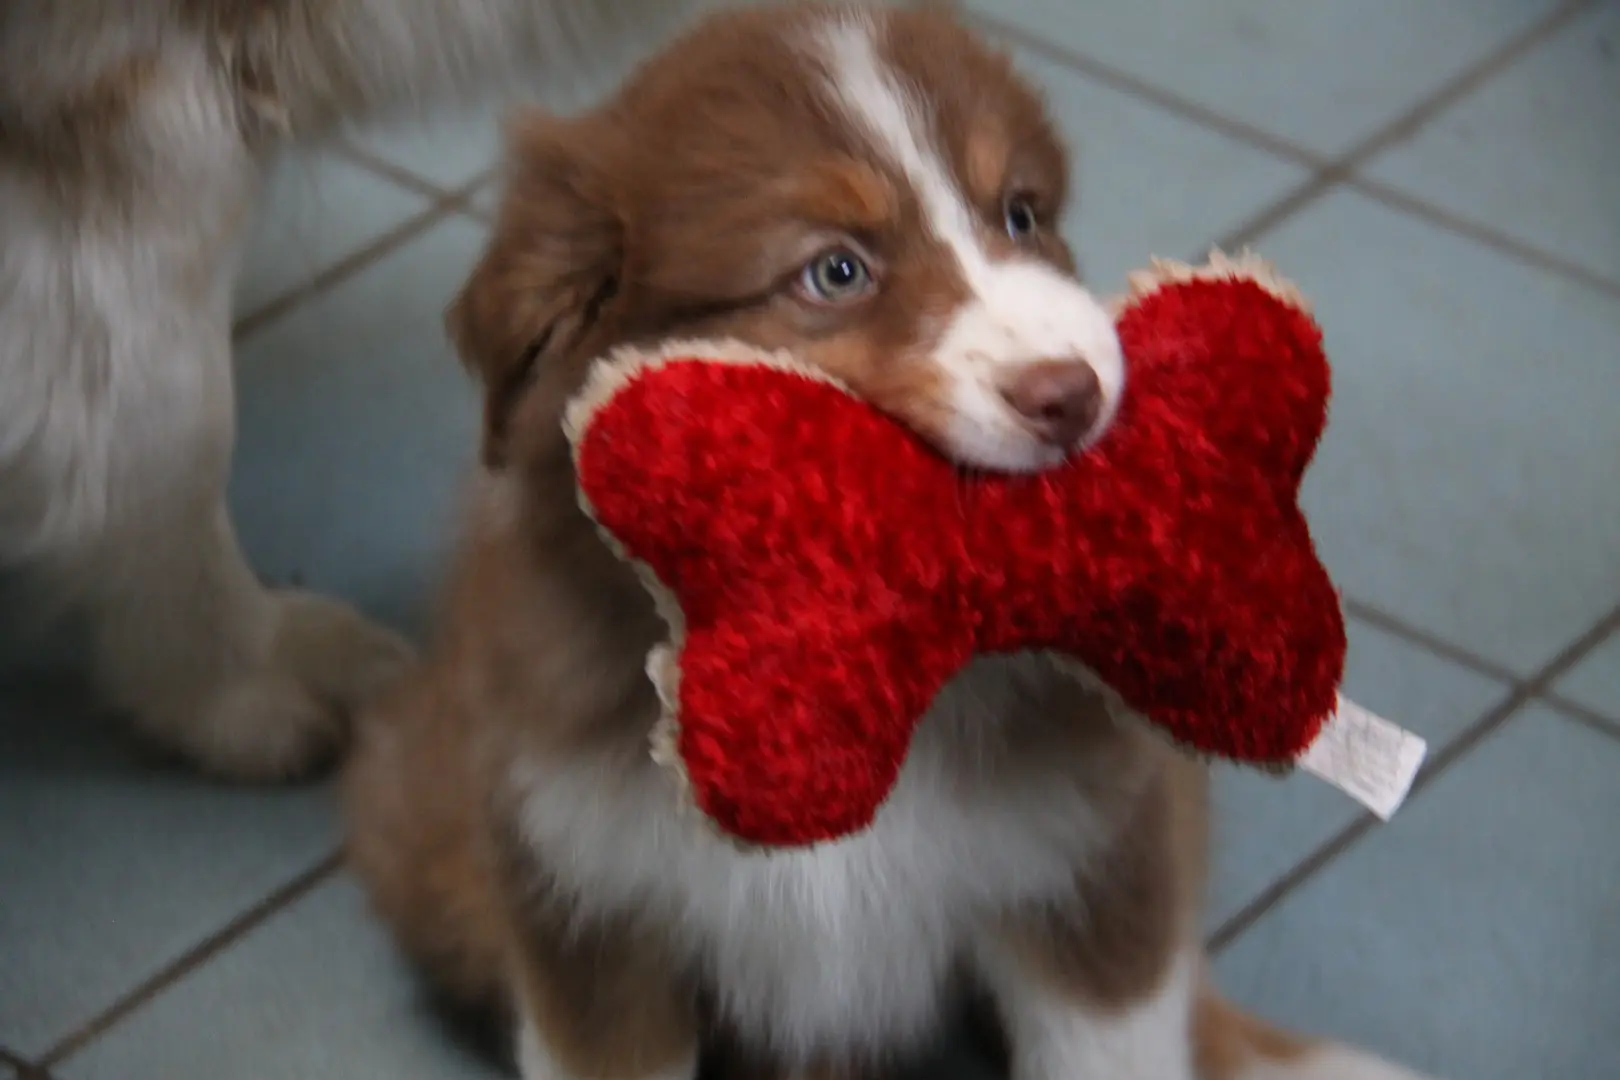 Australian Shepherd puppy with red bone toy in mouth